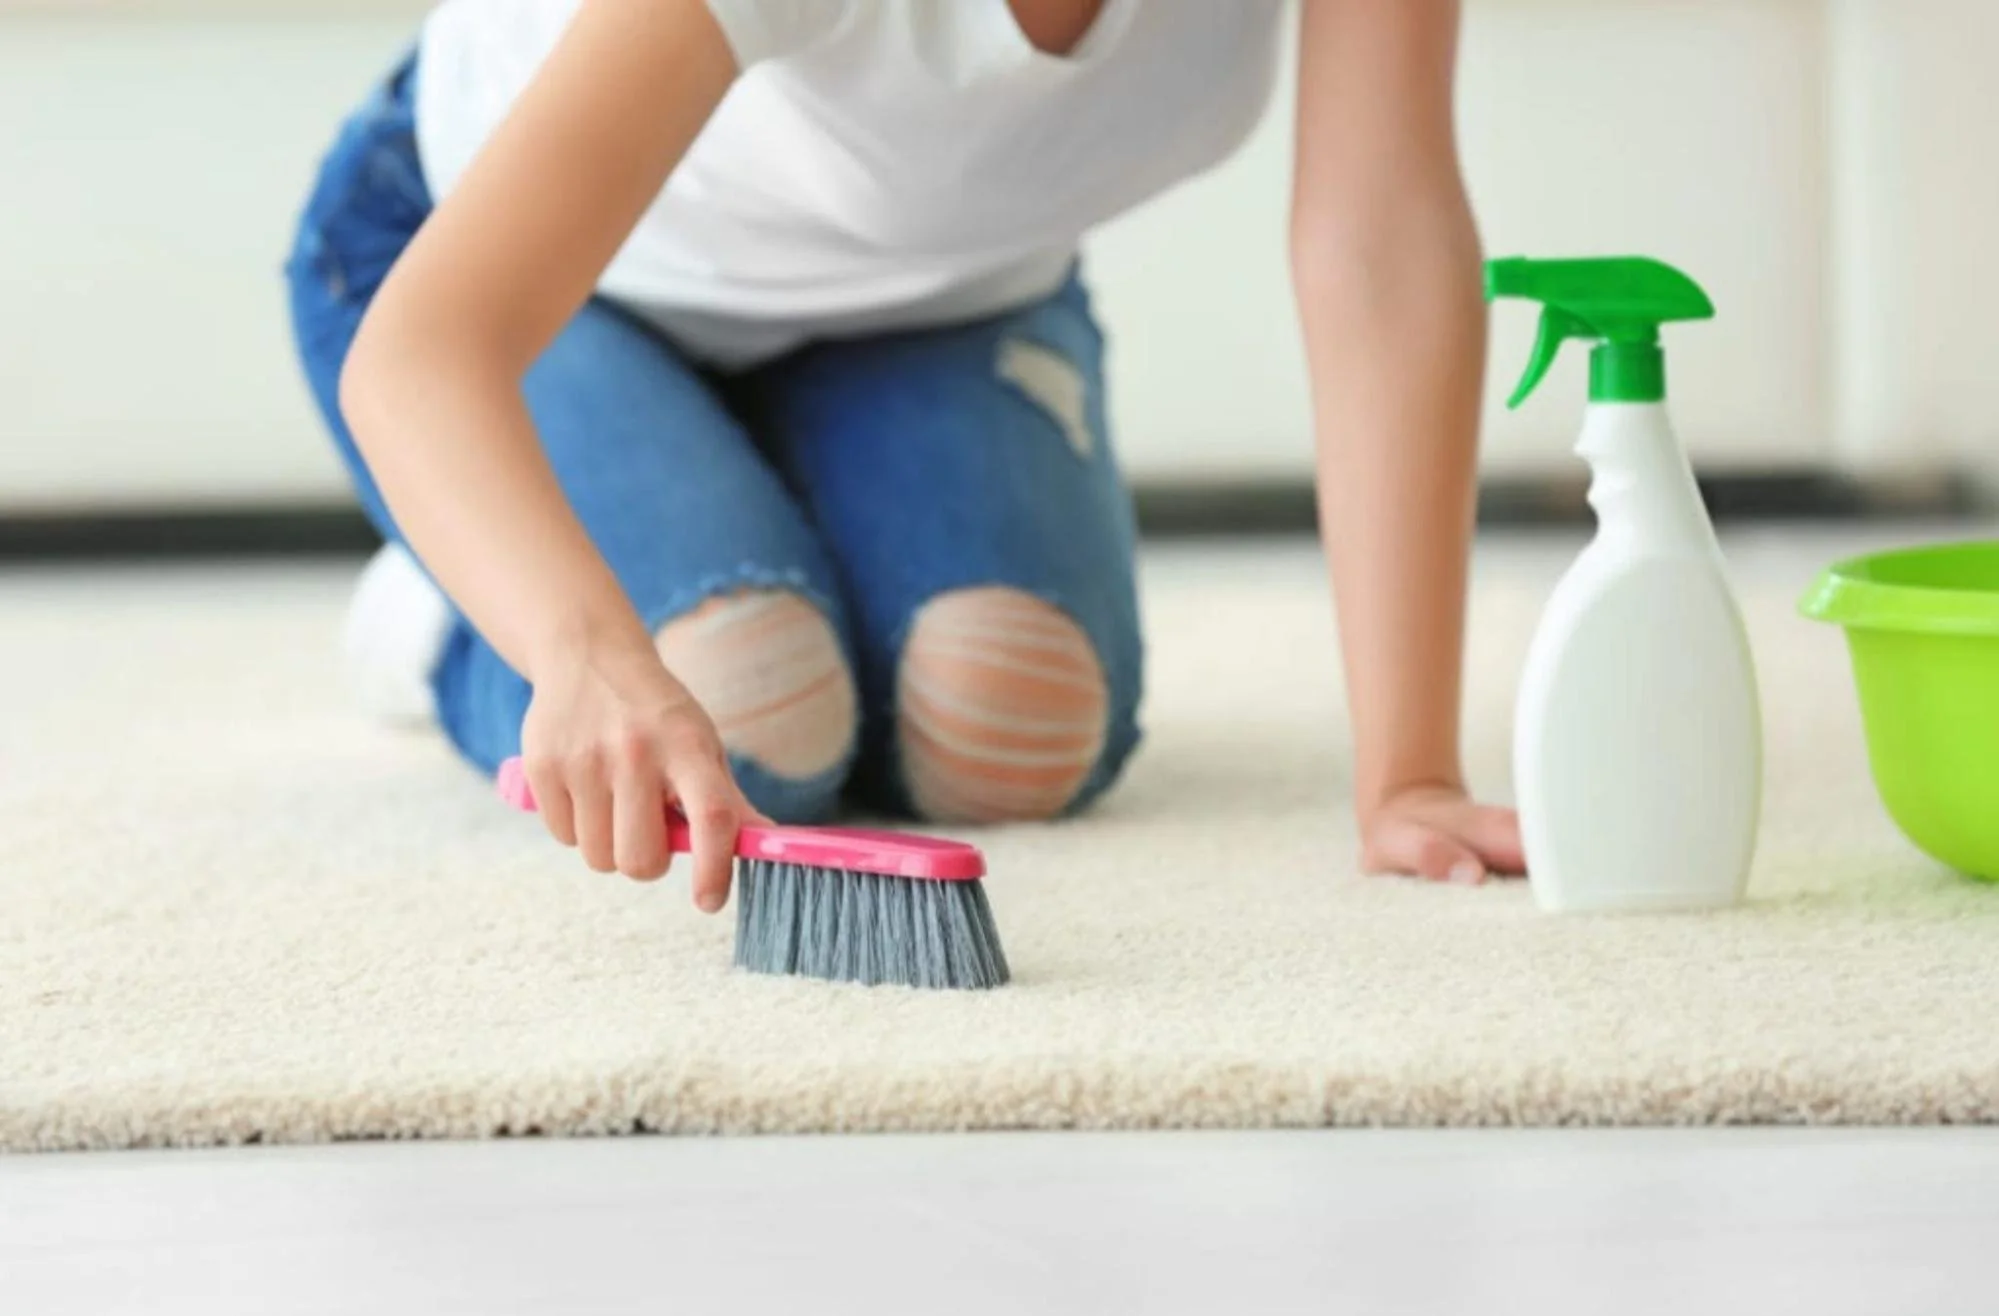 <a href='https://greatertennessee.com/how-to-deep-clean-the-carpet/' title='How to Deep Clean the Carpet'>How to Deep Clean the Carpet</a>